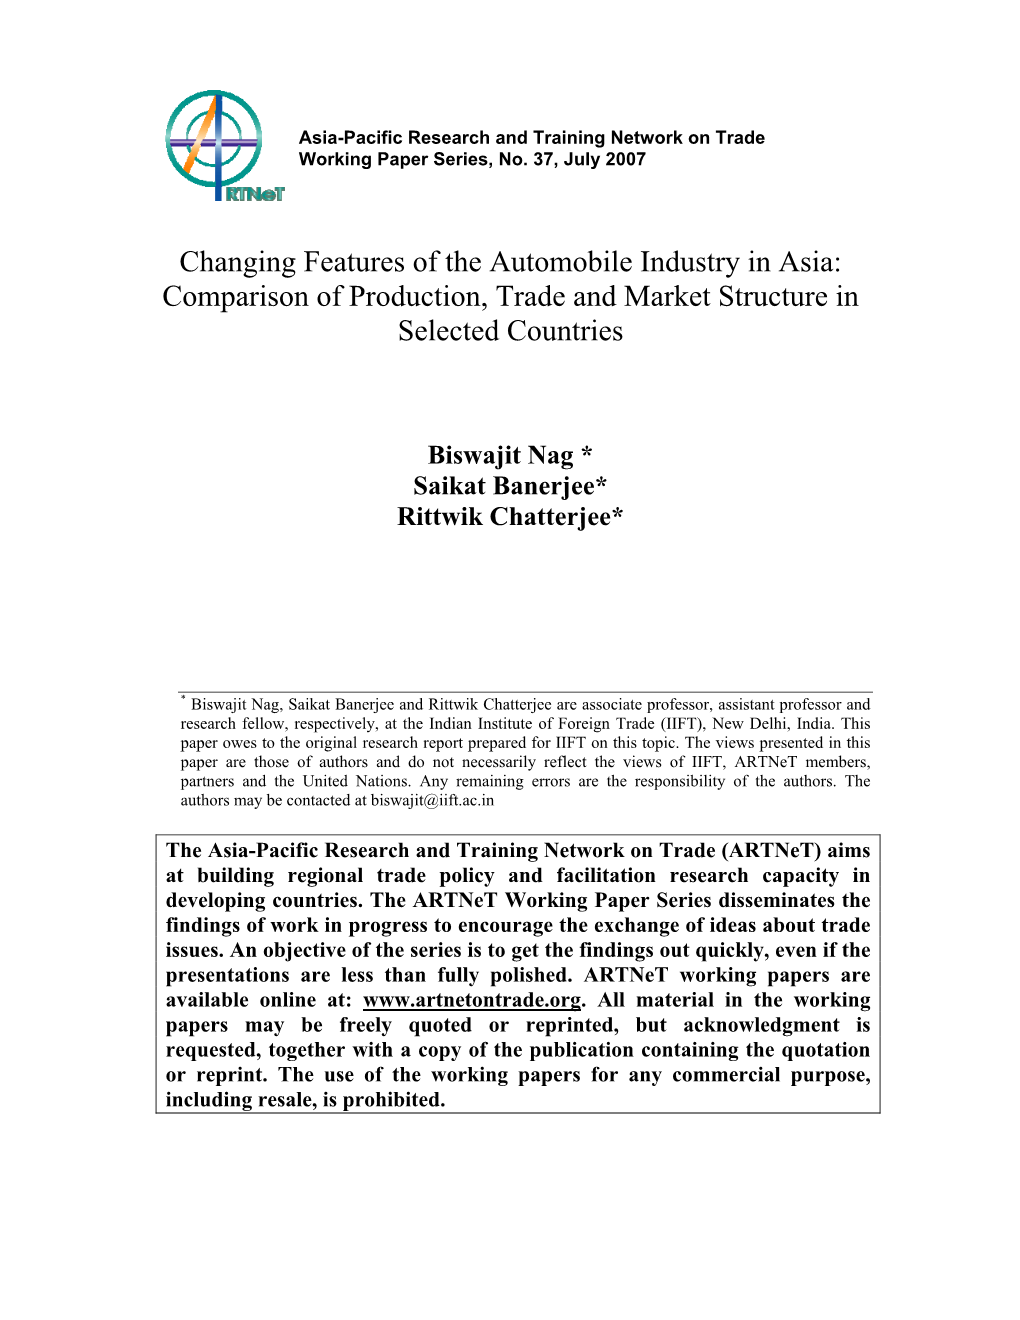 An Analysis of Automobile Industry in Selected Asian Countries